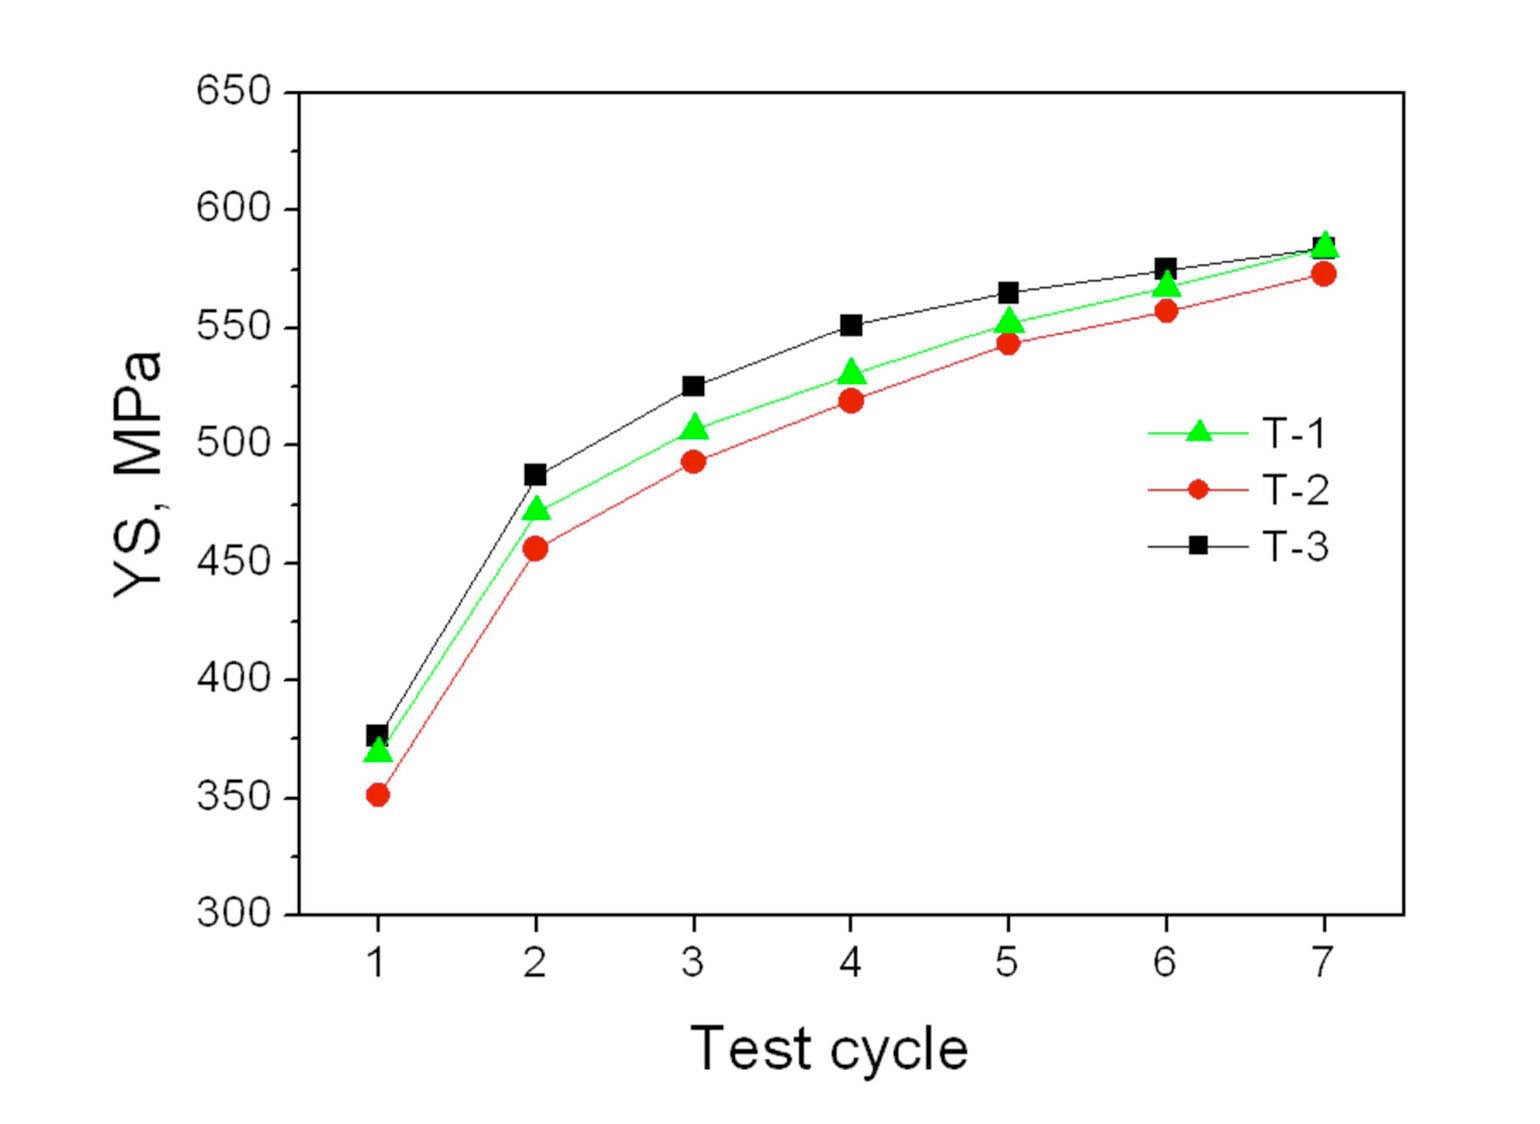 Yield Strength Variation with the Repeated Tensile Test at a 5% Strain of the Tested Alloys